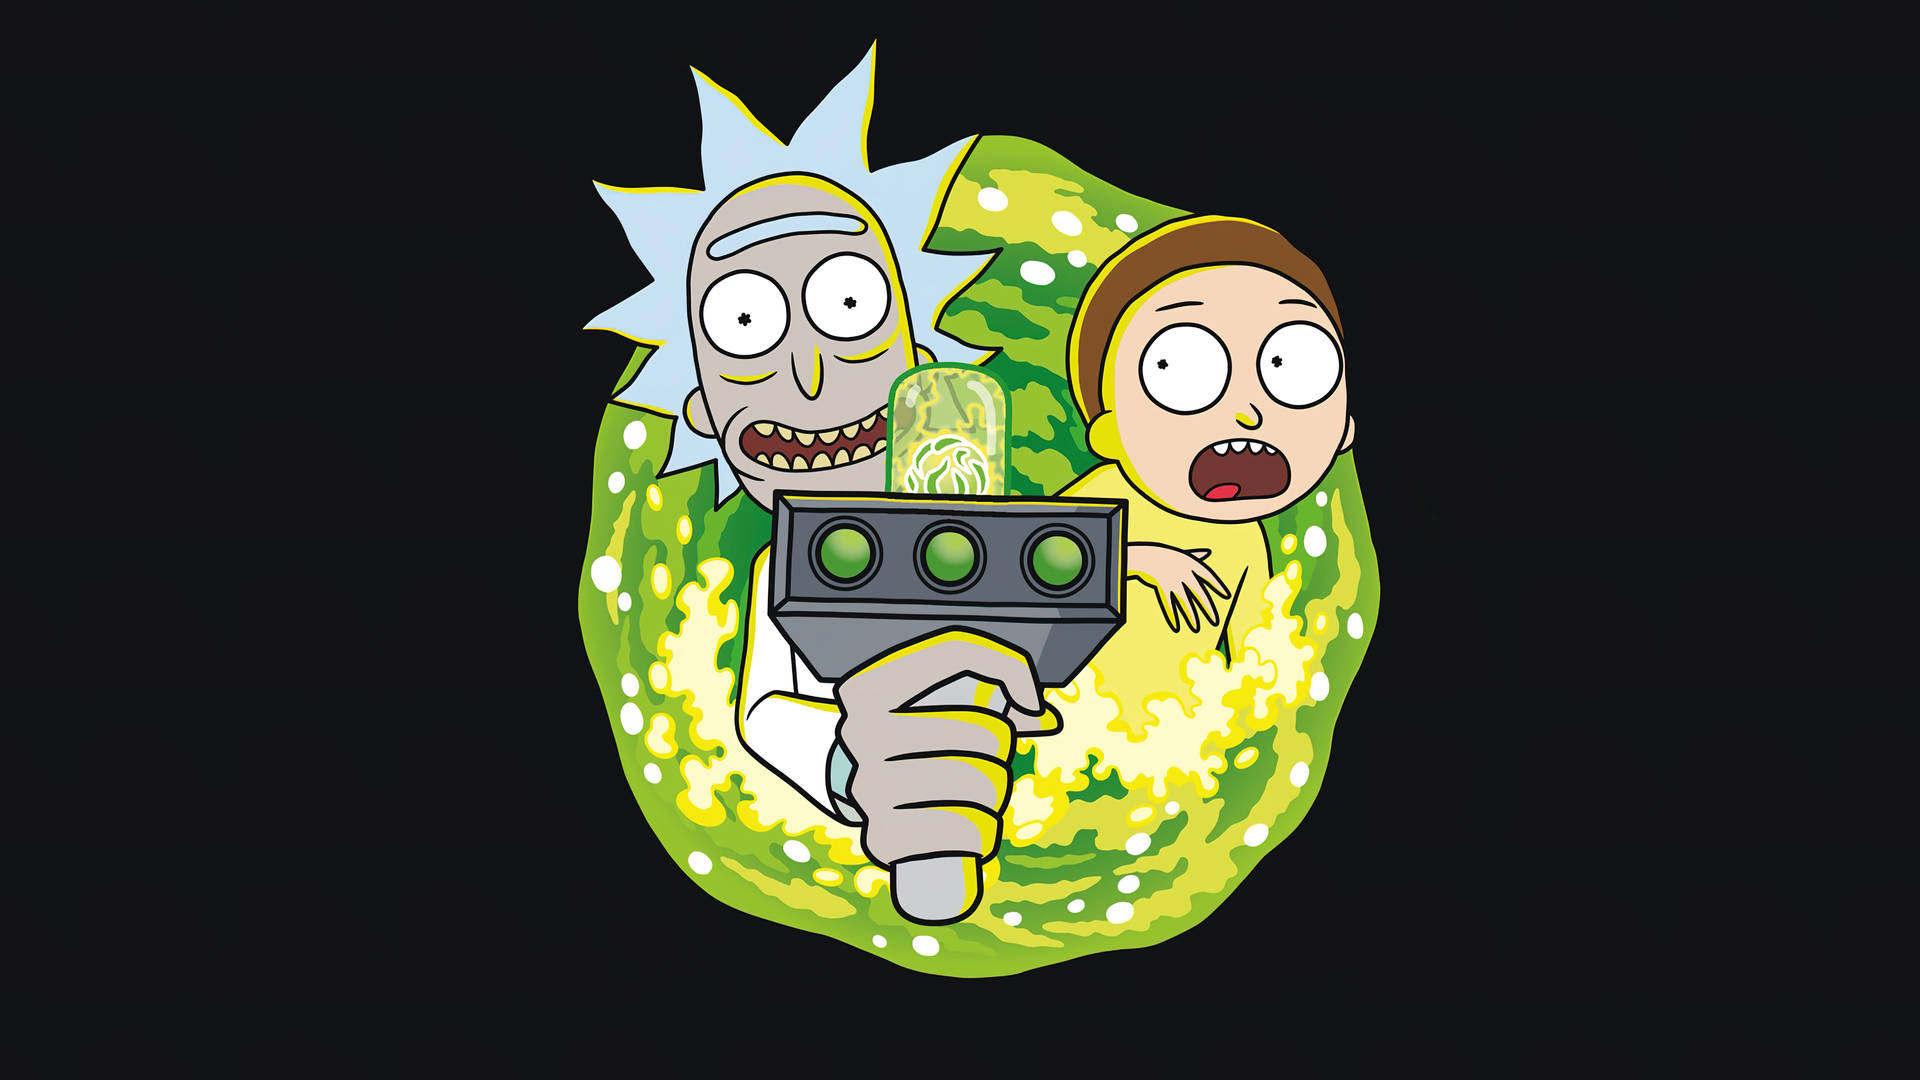 "Catch up with 'Rick and Morty' on your HD Computer" Wallpaper